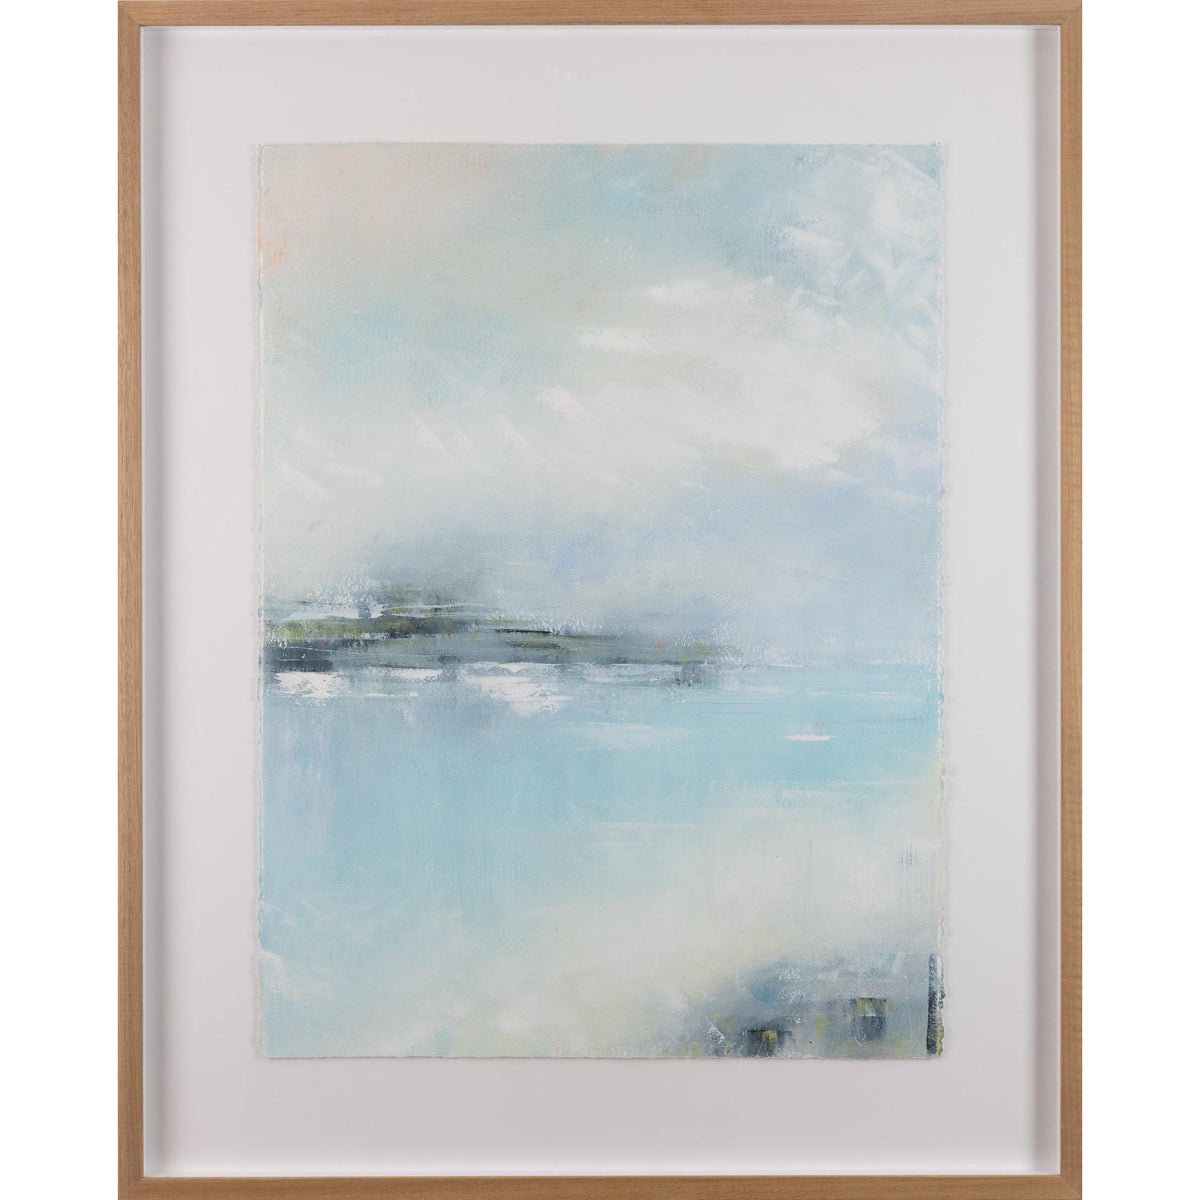 &#39;Over the River&#39; oil on paper by Ben Lucas, available at Padstow Gallery, Cornwall